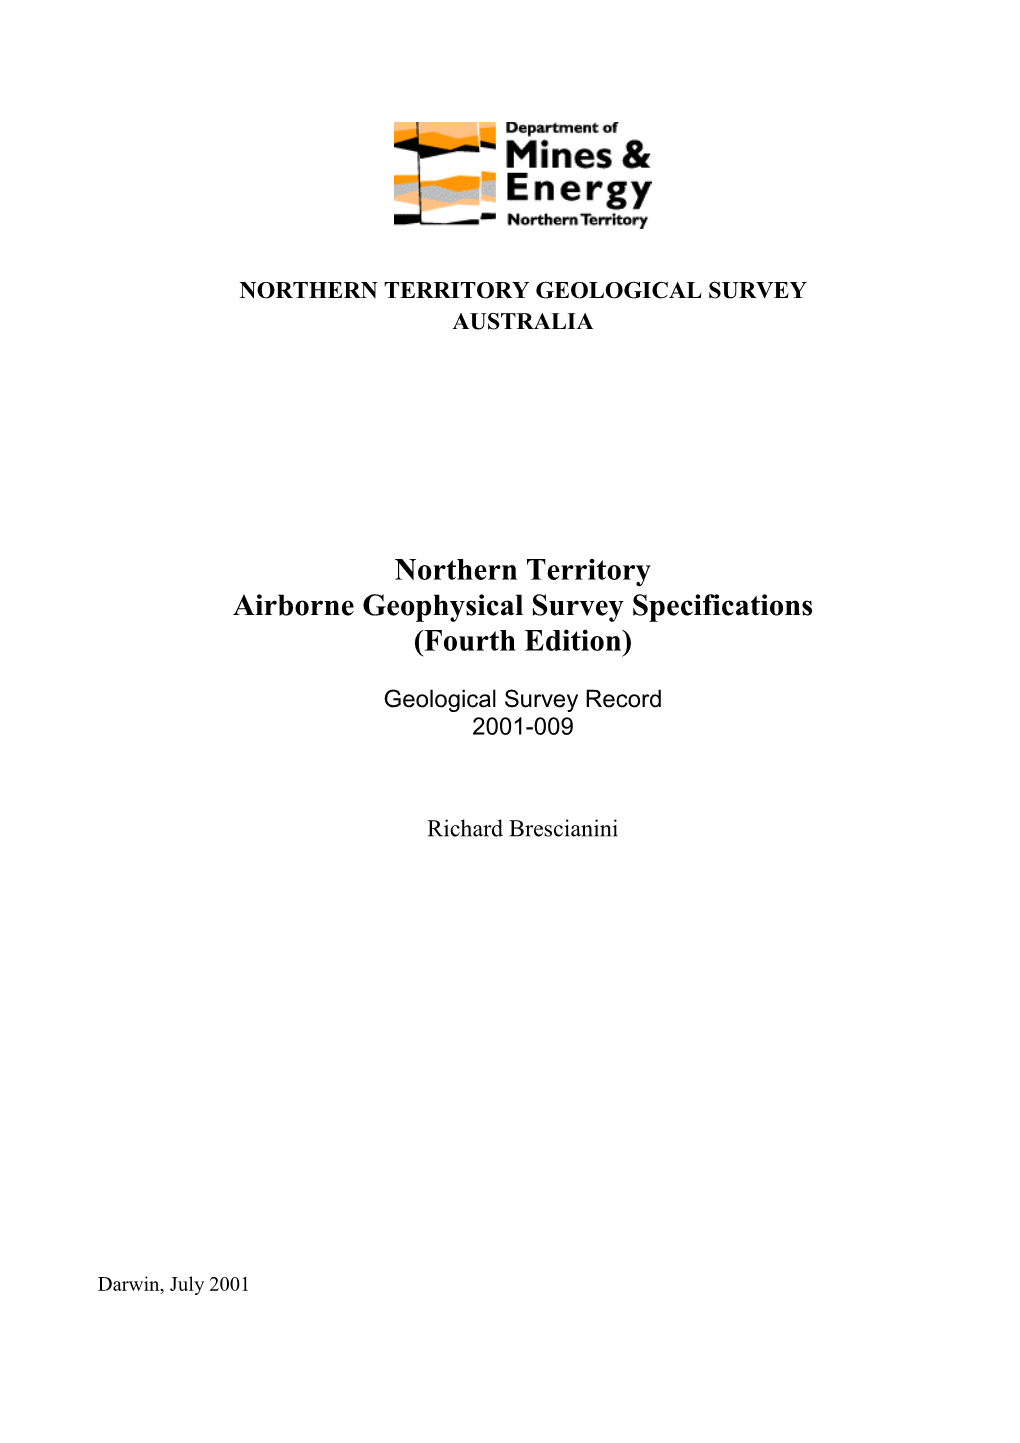 Northern Territory Airborne Geophysical Survey Specifications (Fourth Edition)